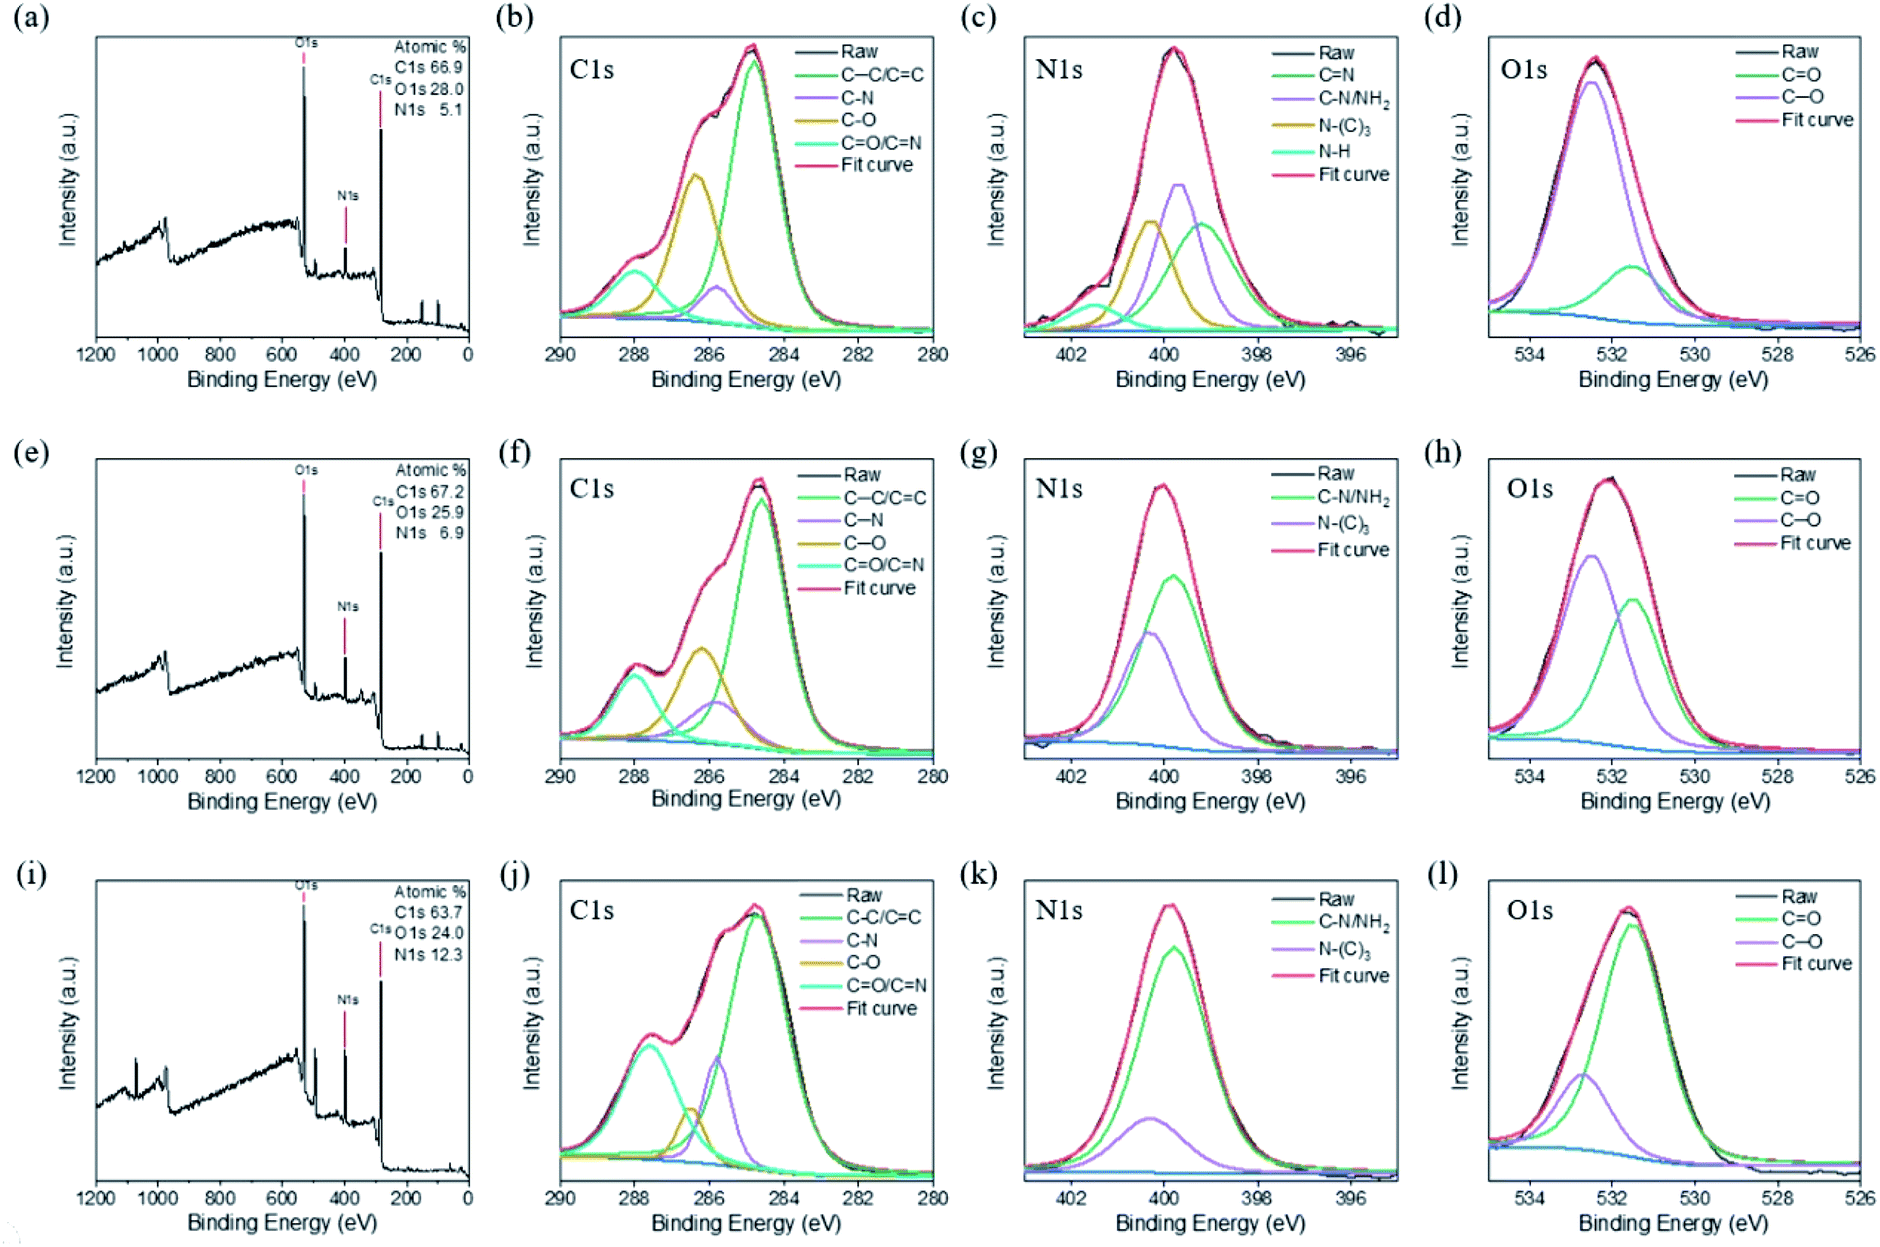 Cytotoxicity And Cell Imaging Of Six Types Of Carbon Nanodots Prepared Through Carbonization And Hydrothermal Processing Of Natural Plant Materials Rsc Advances Rsc Publishing Doi 10 1039 D1raa